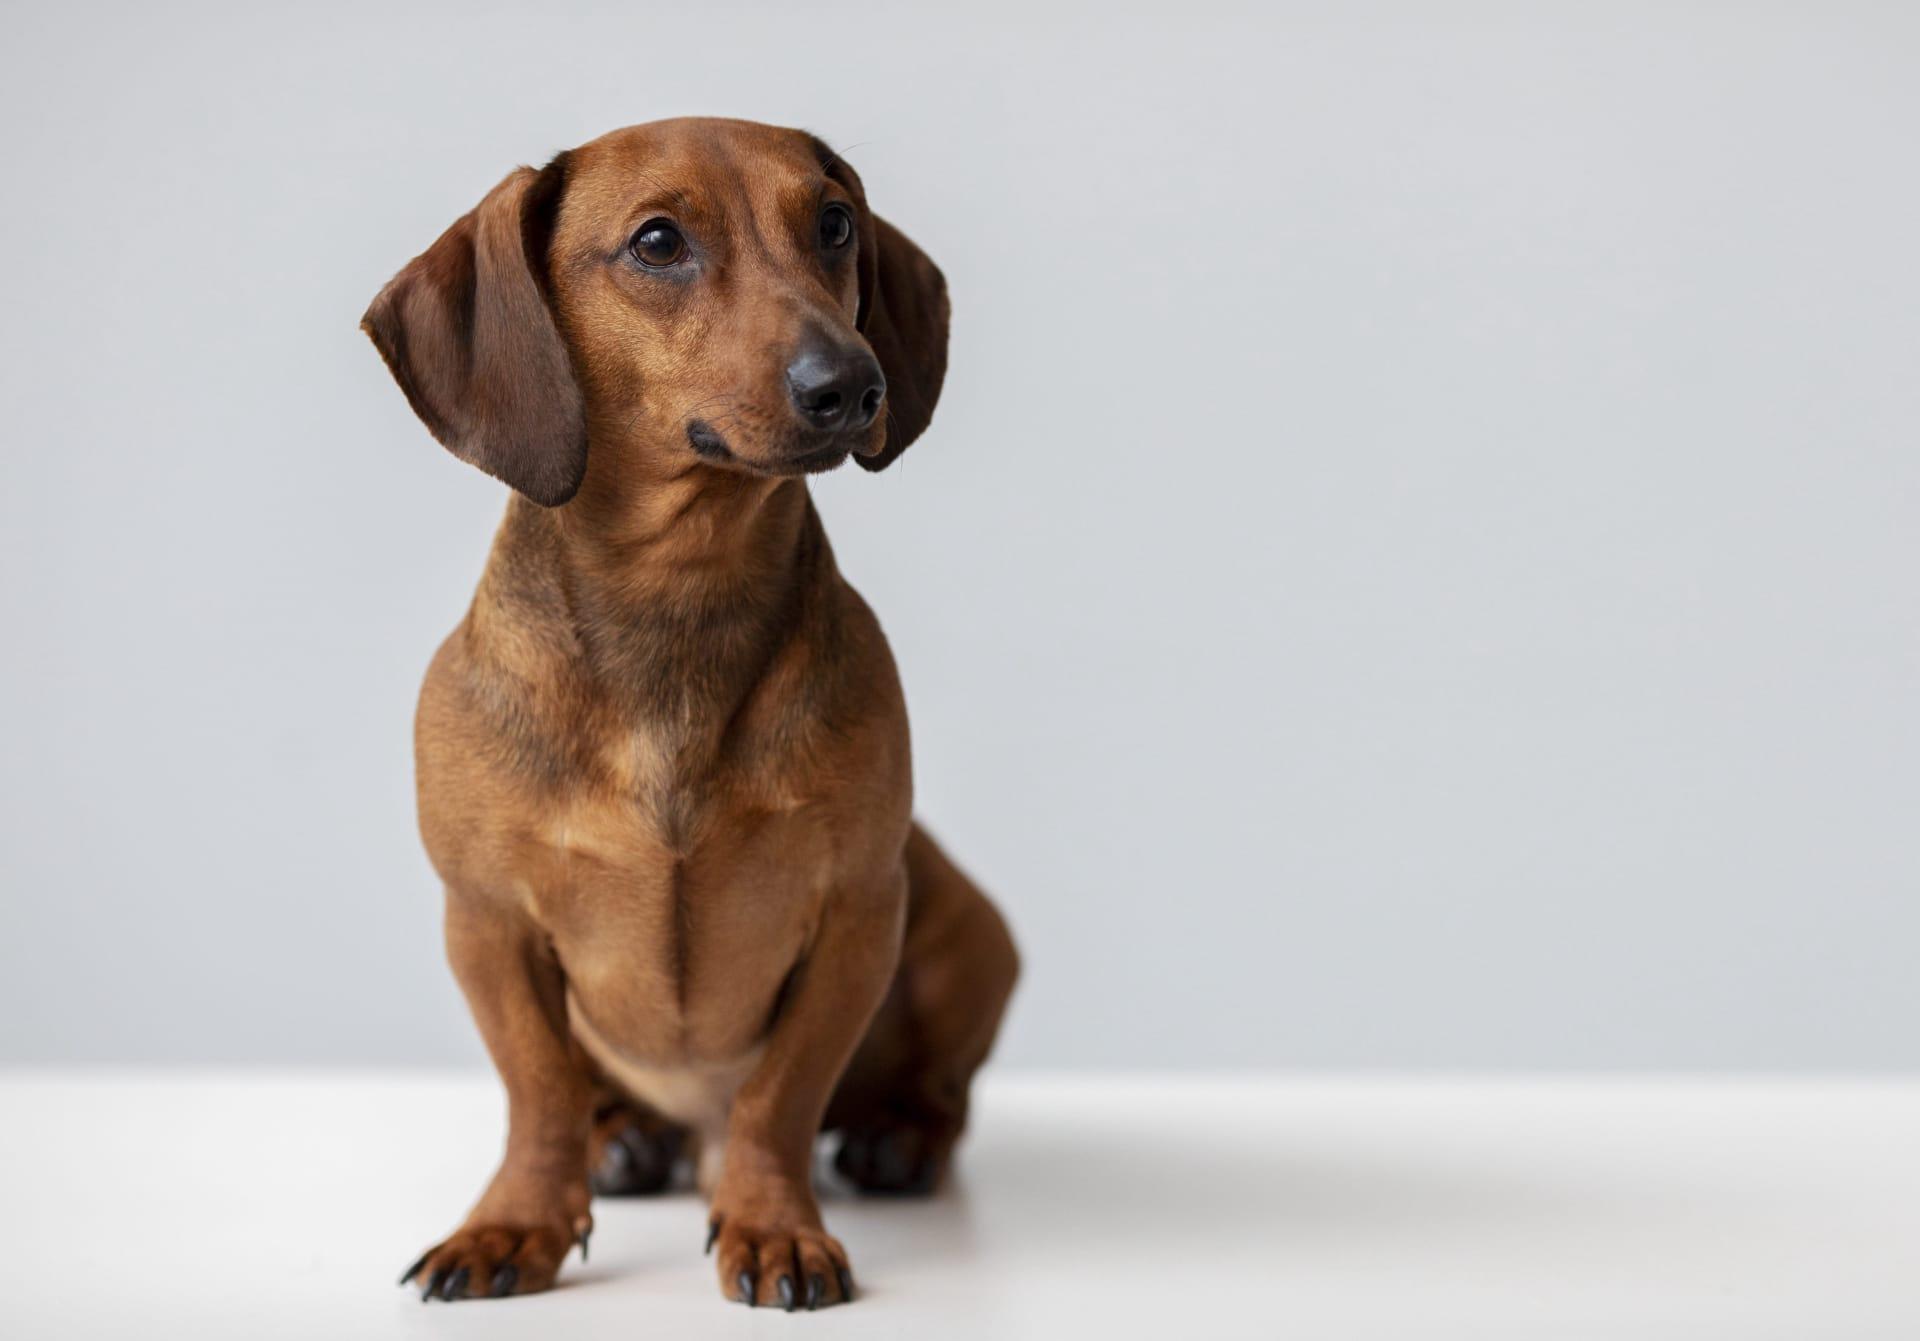 Dachshund pictures